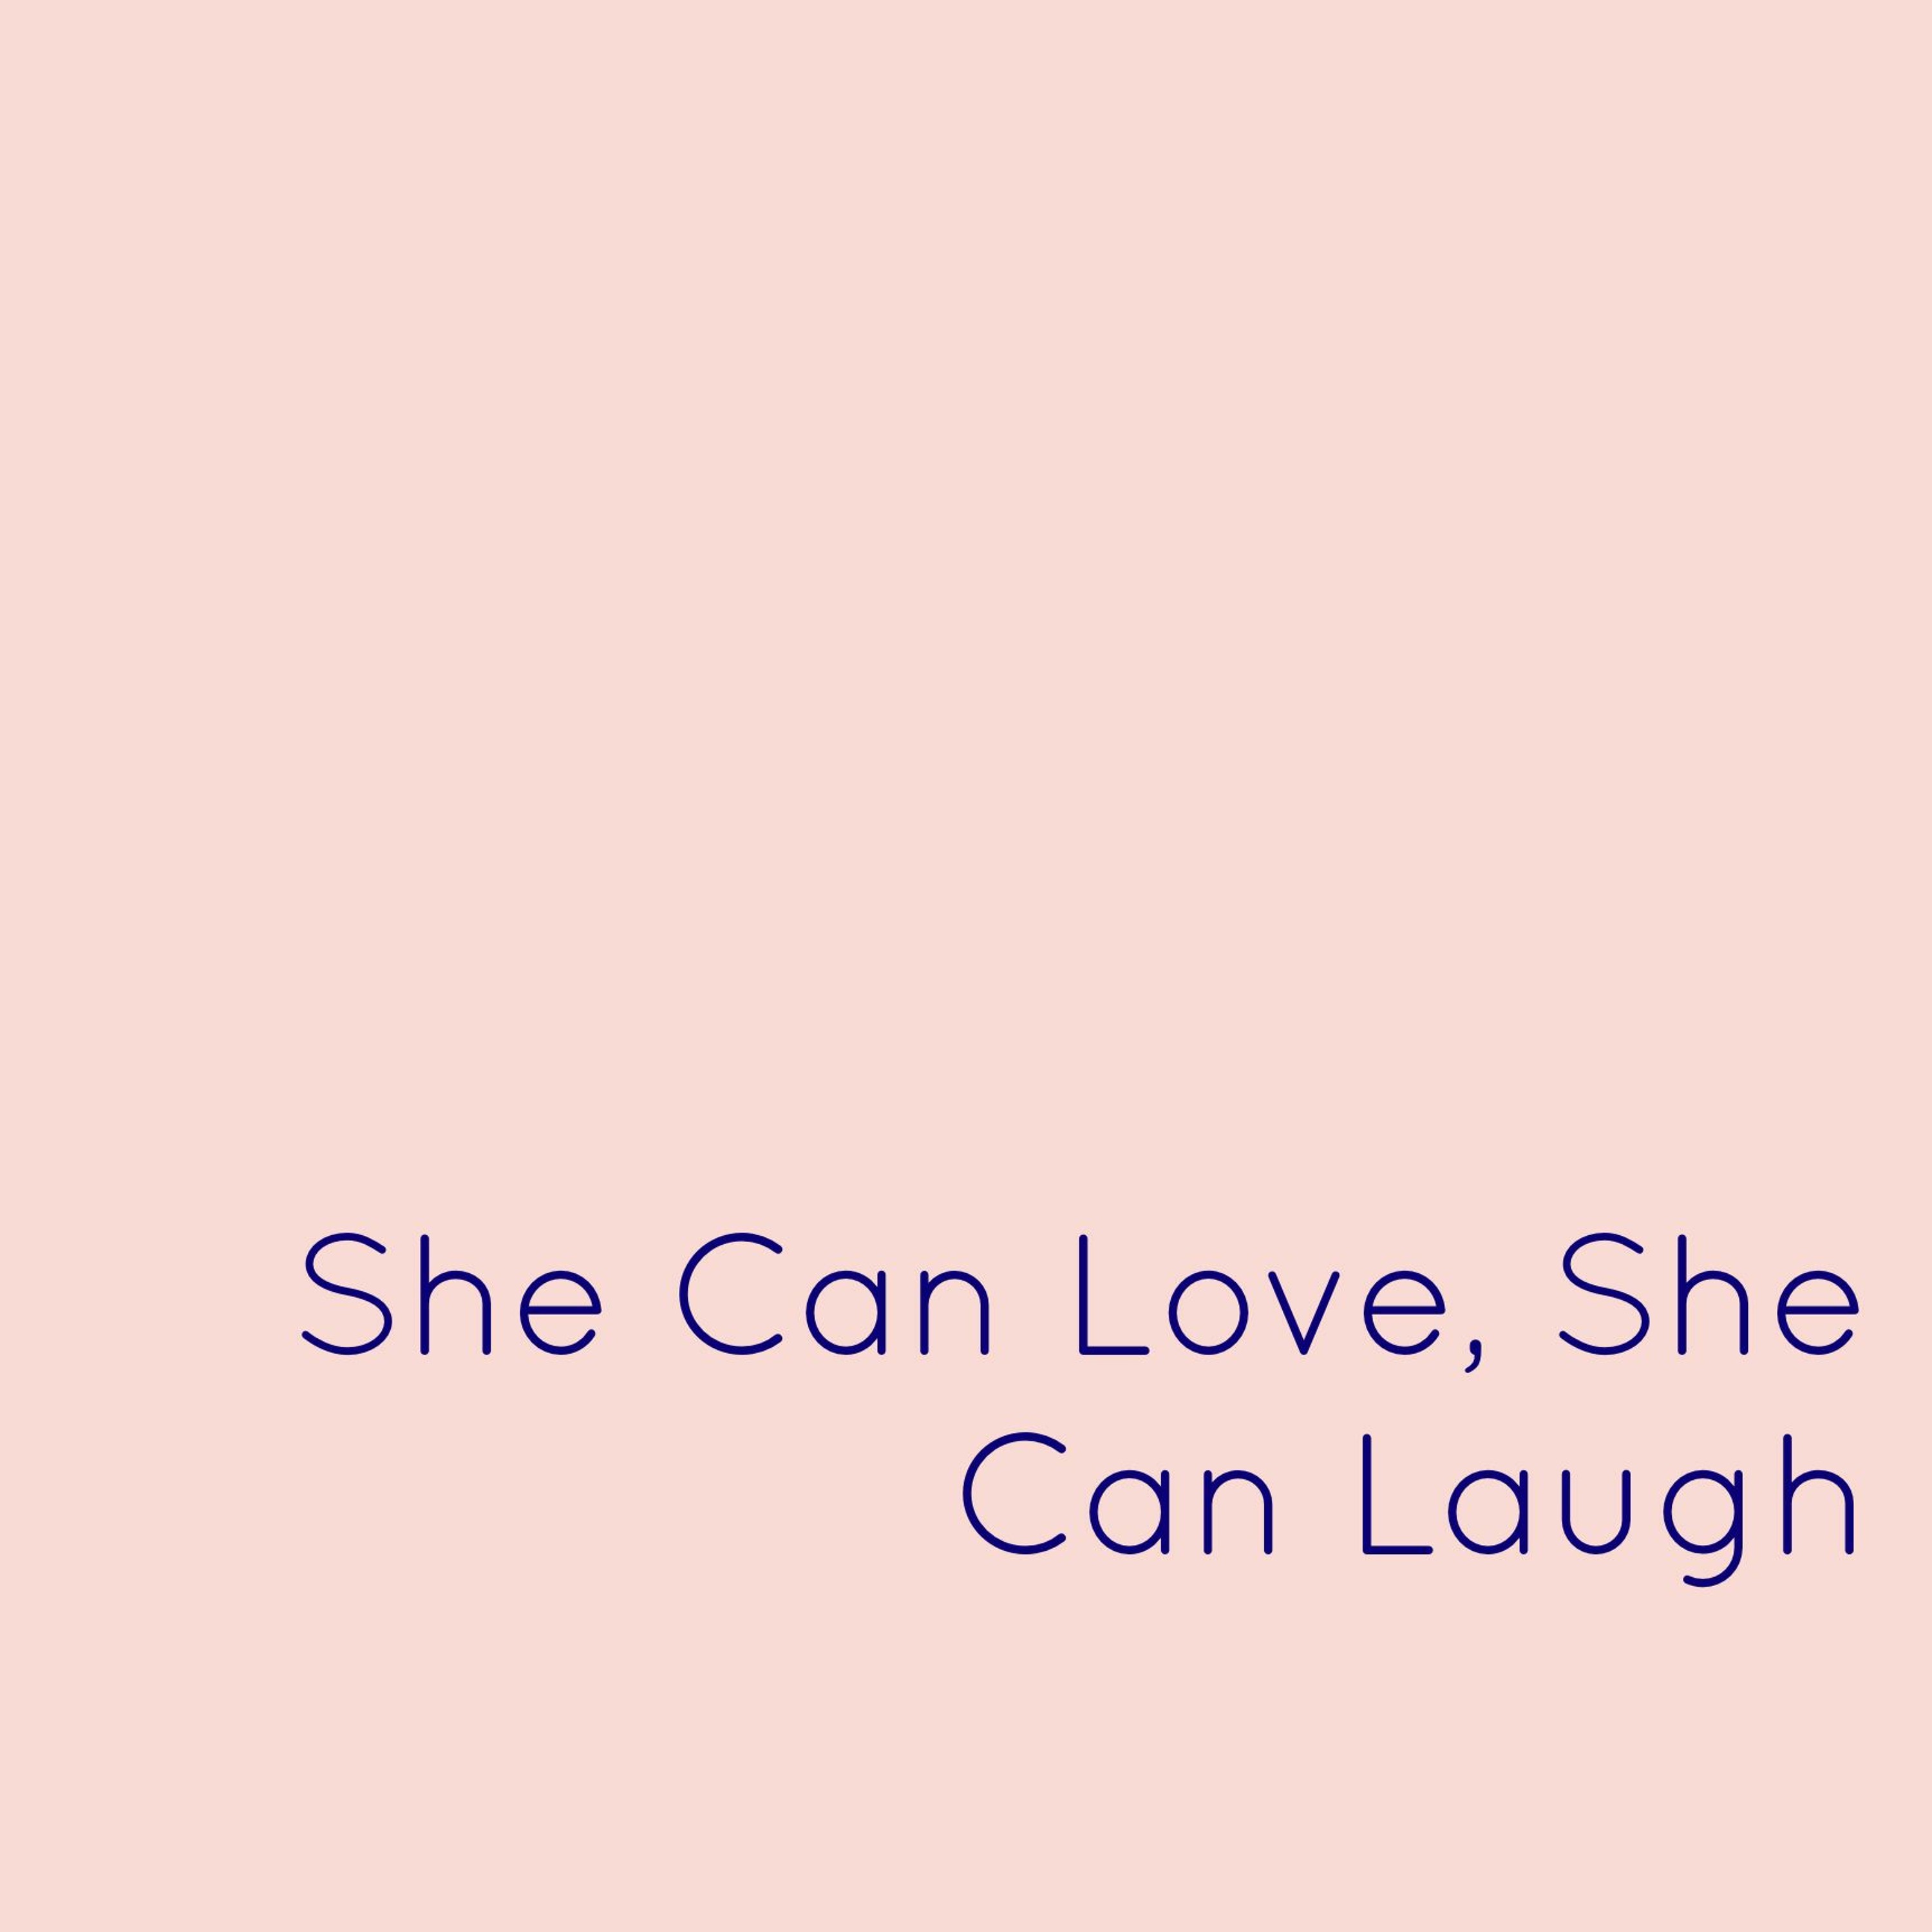 Ep 19: She Can Love, She Can Laugh